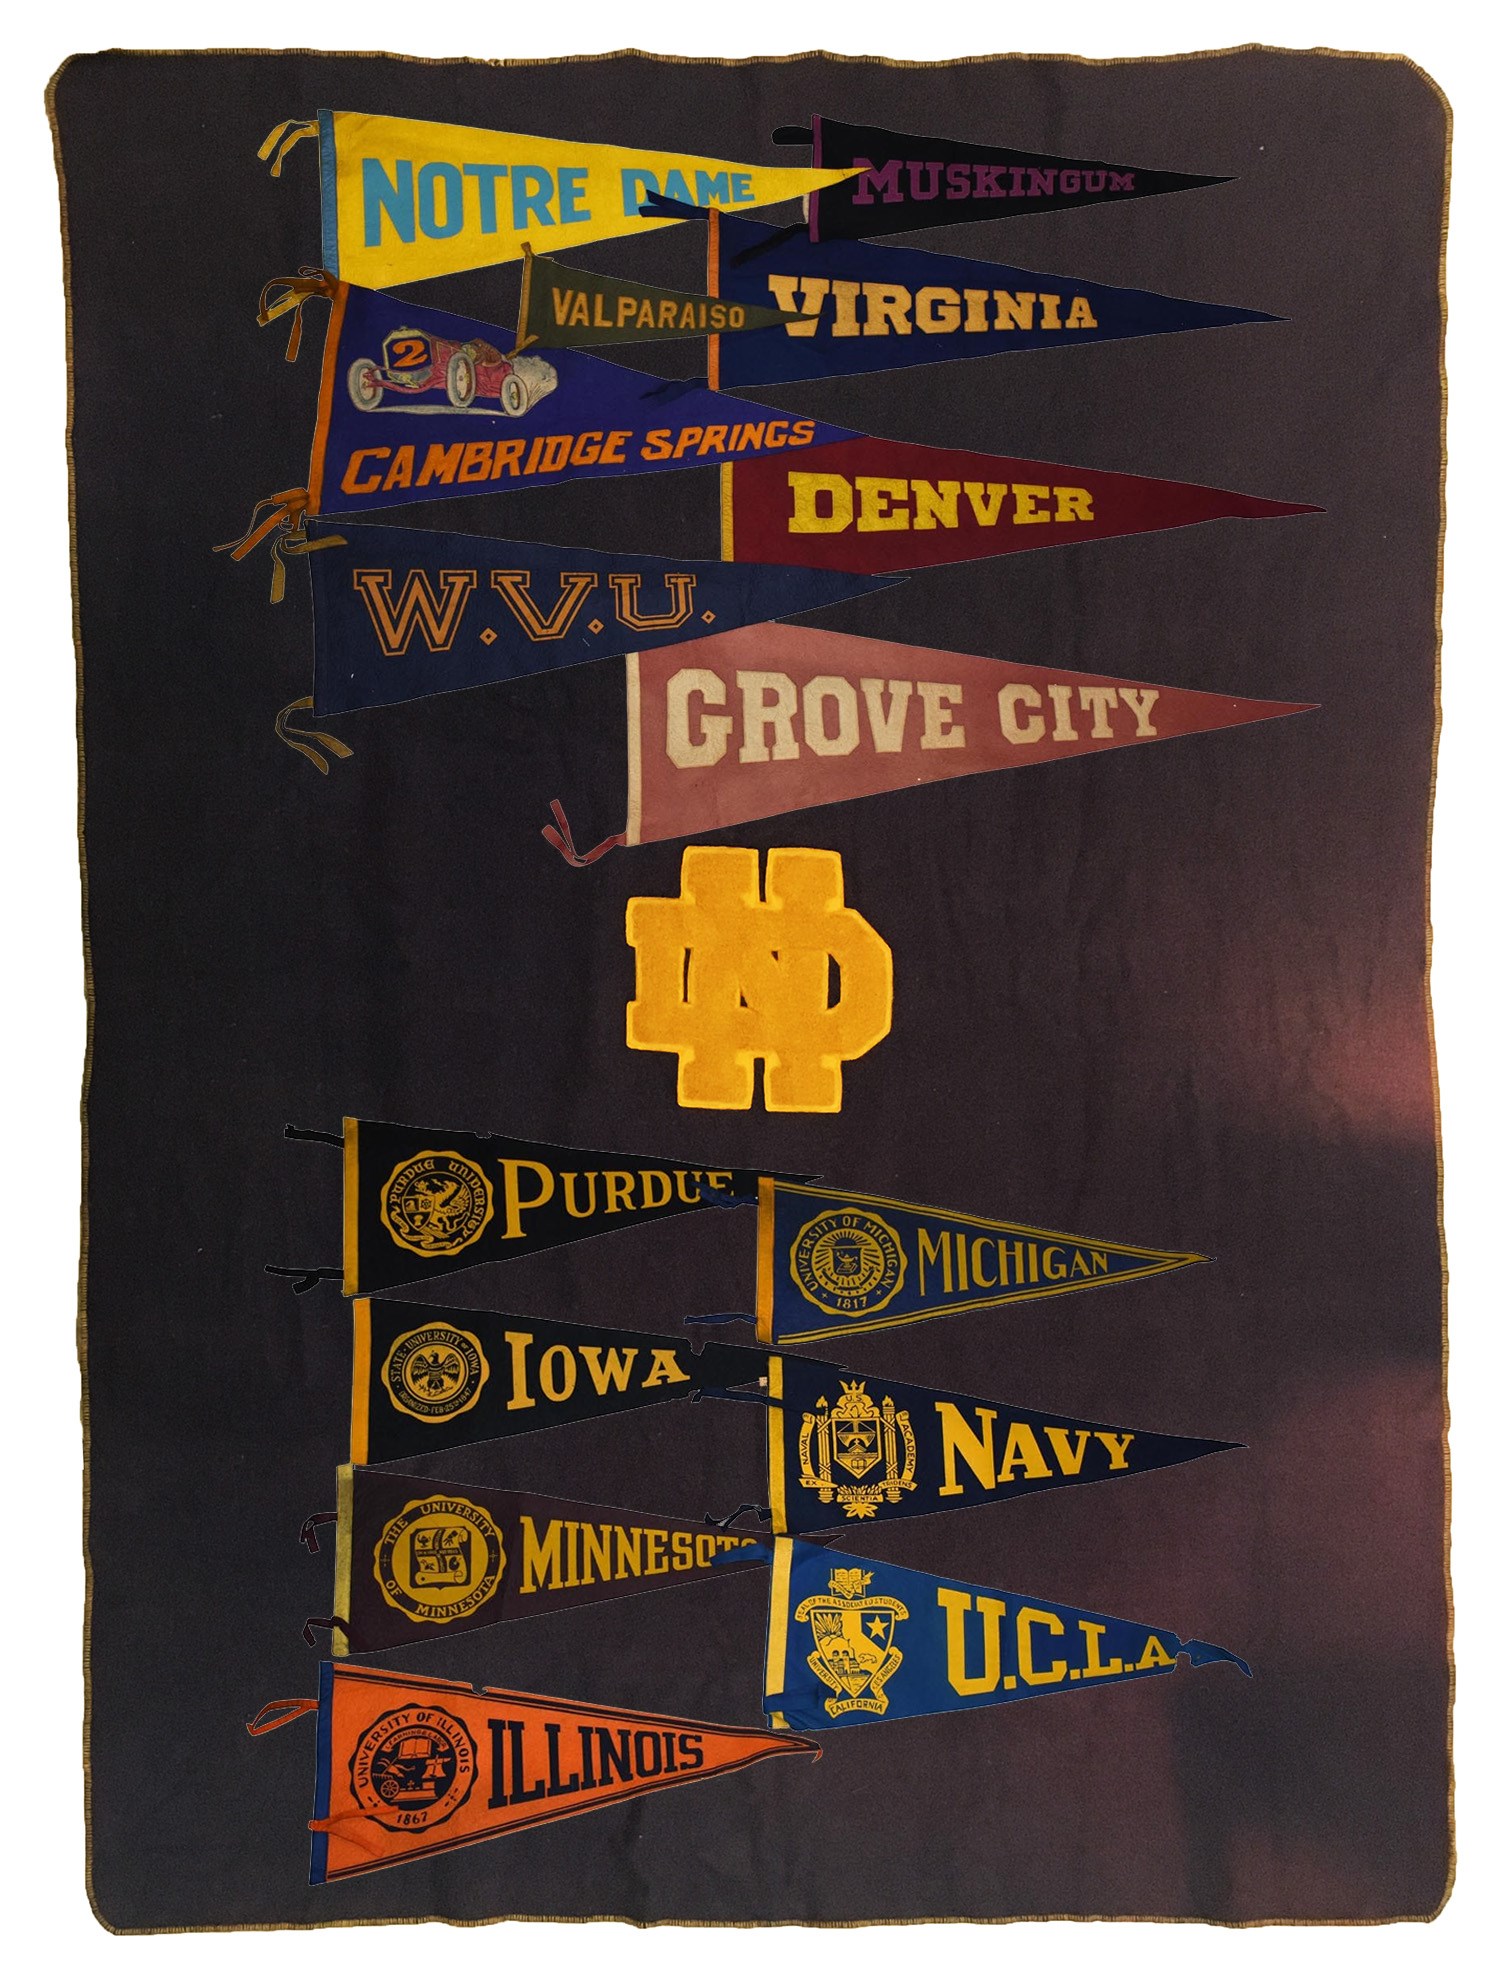 Football - Vintage College Pennant & Blanket Collection - Notre Dame, Michigan, Army, Navy (40+)